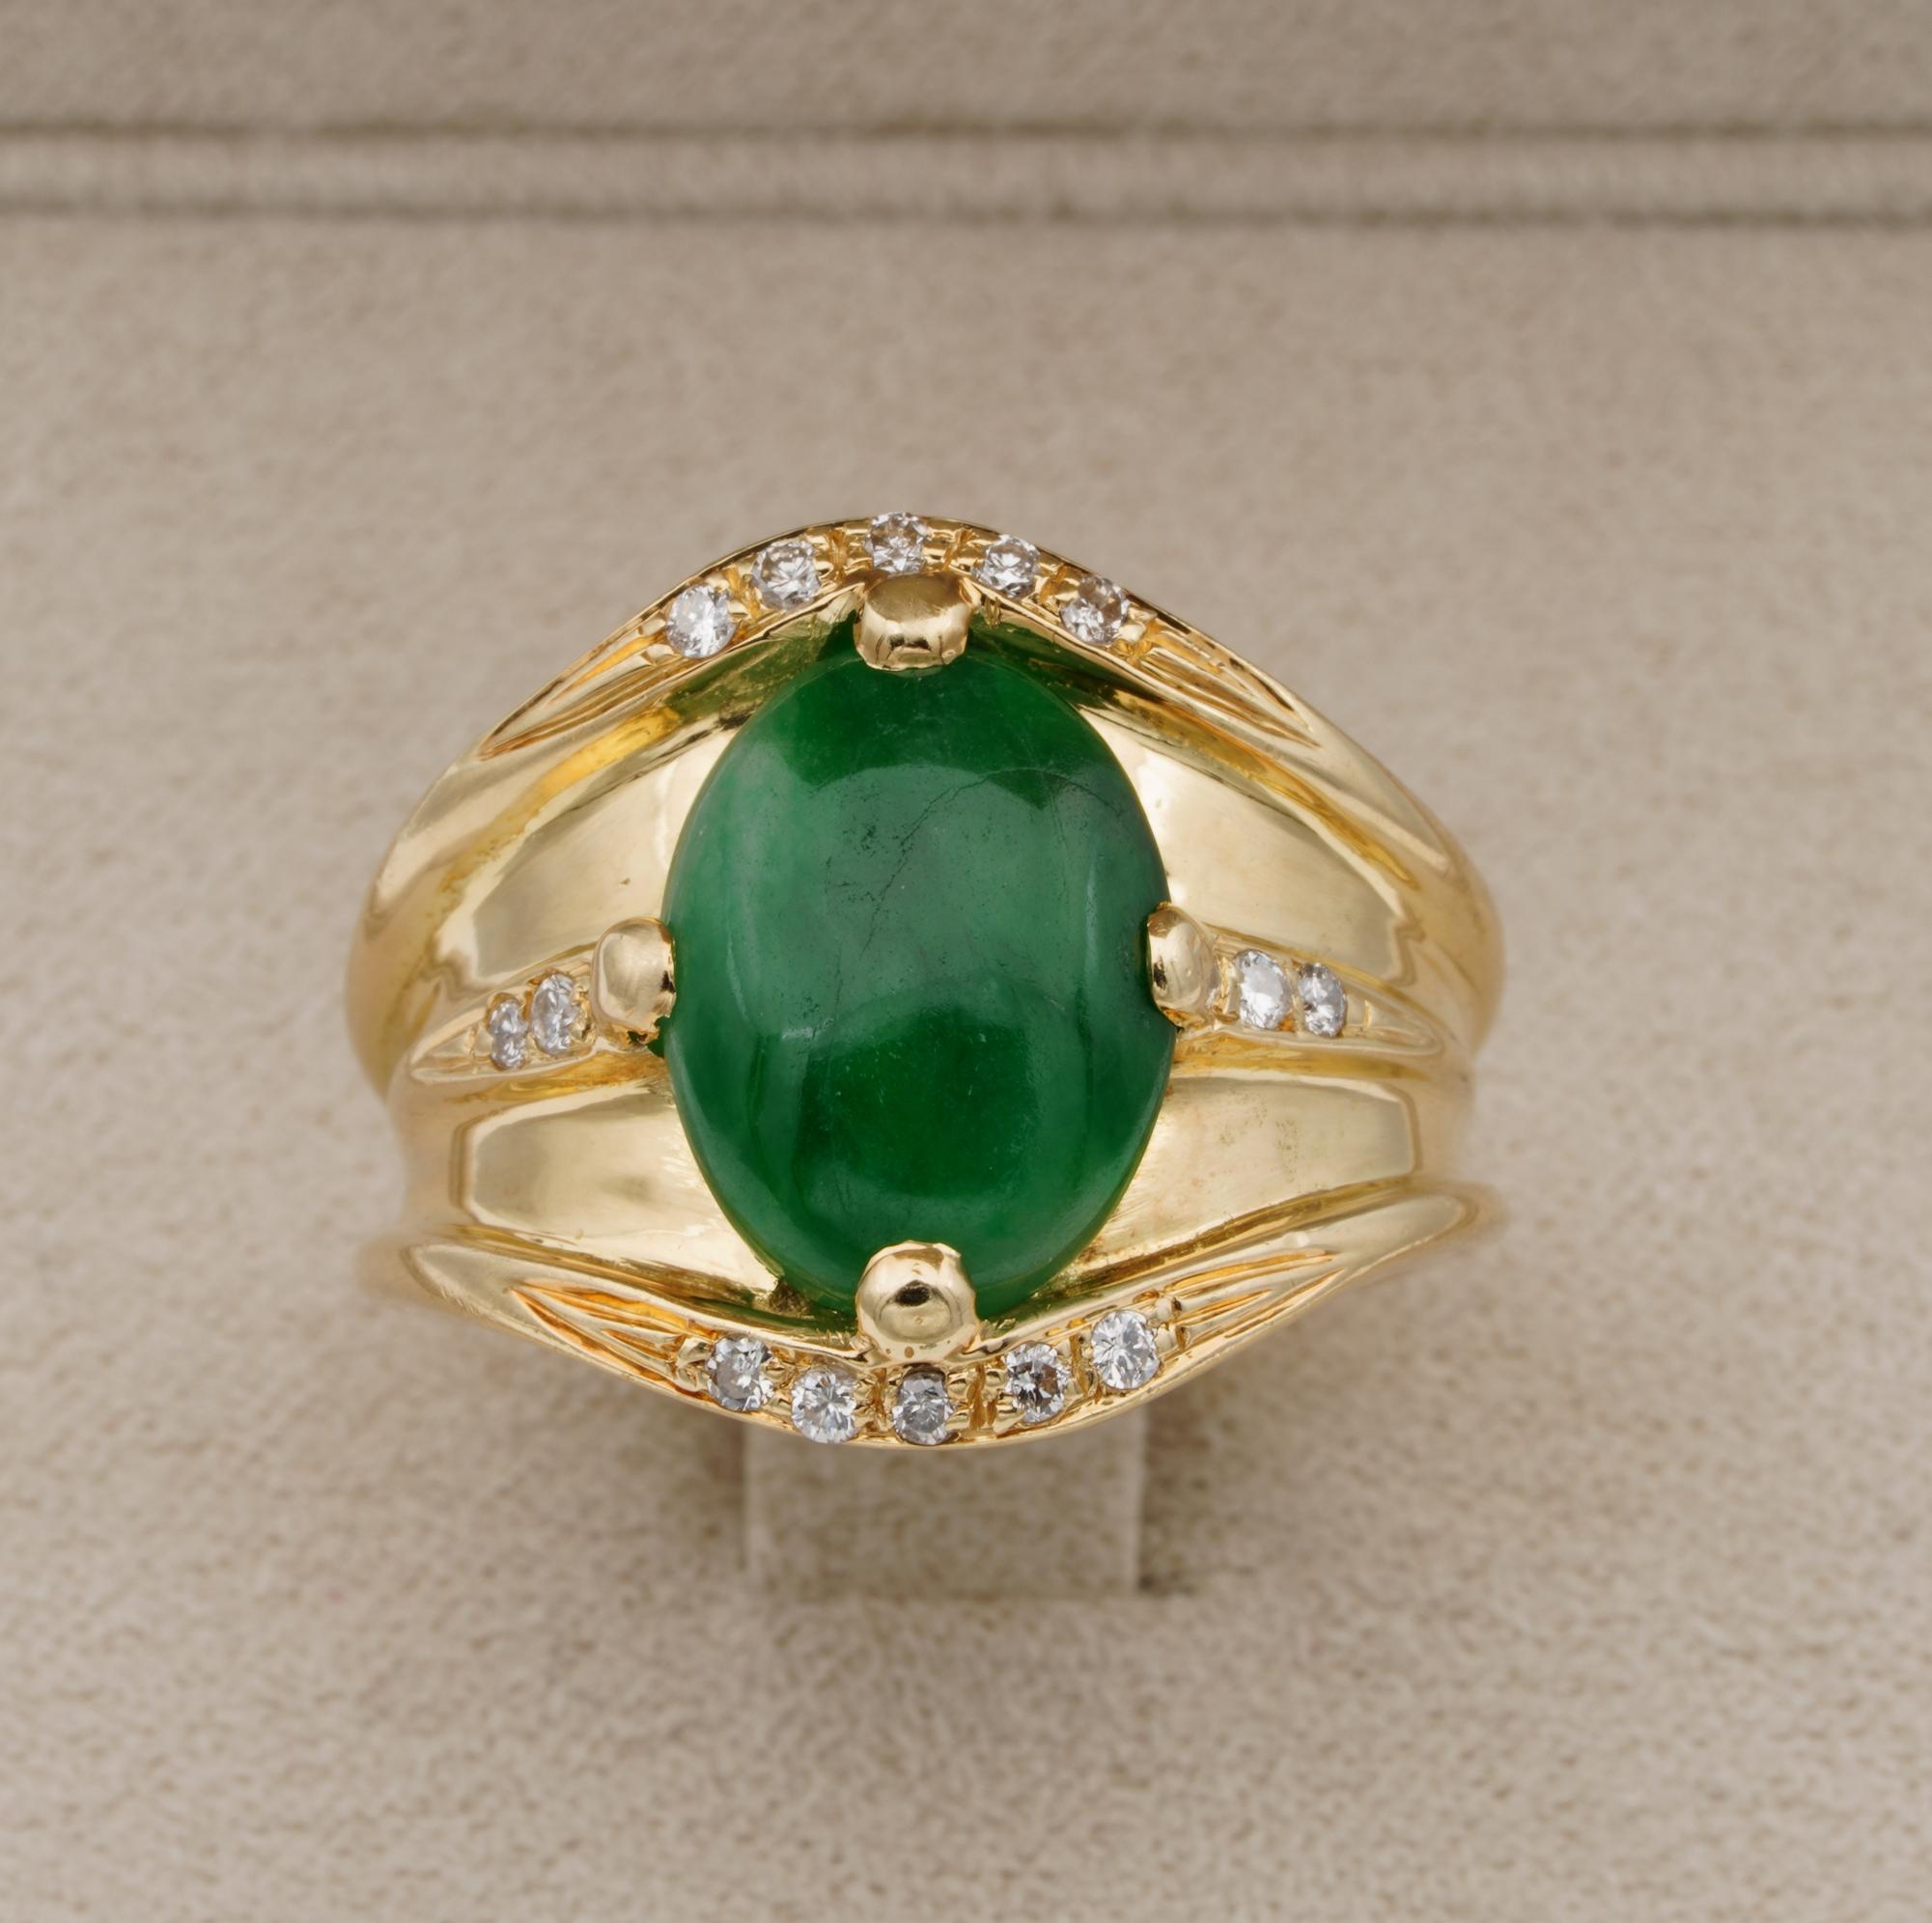 A Legend since Neolithic times

Magnificent example of natural Green Jade and Diamond ring, hand fashioned for today's lifestyle.
Stylish design made during the 60's / 80's by the great Italian master craftsmen
Heavy gold mount of solid 18 KT gold,